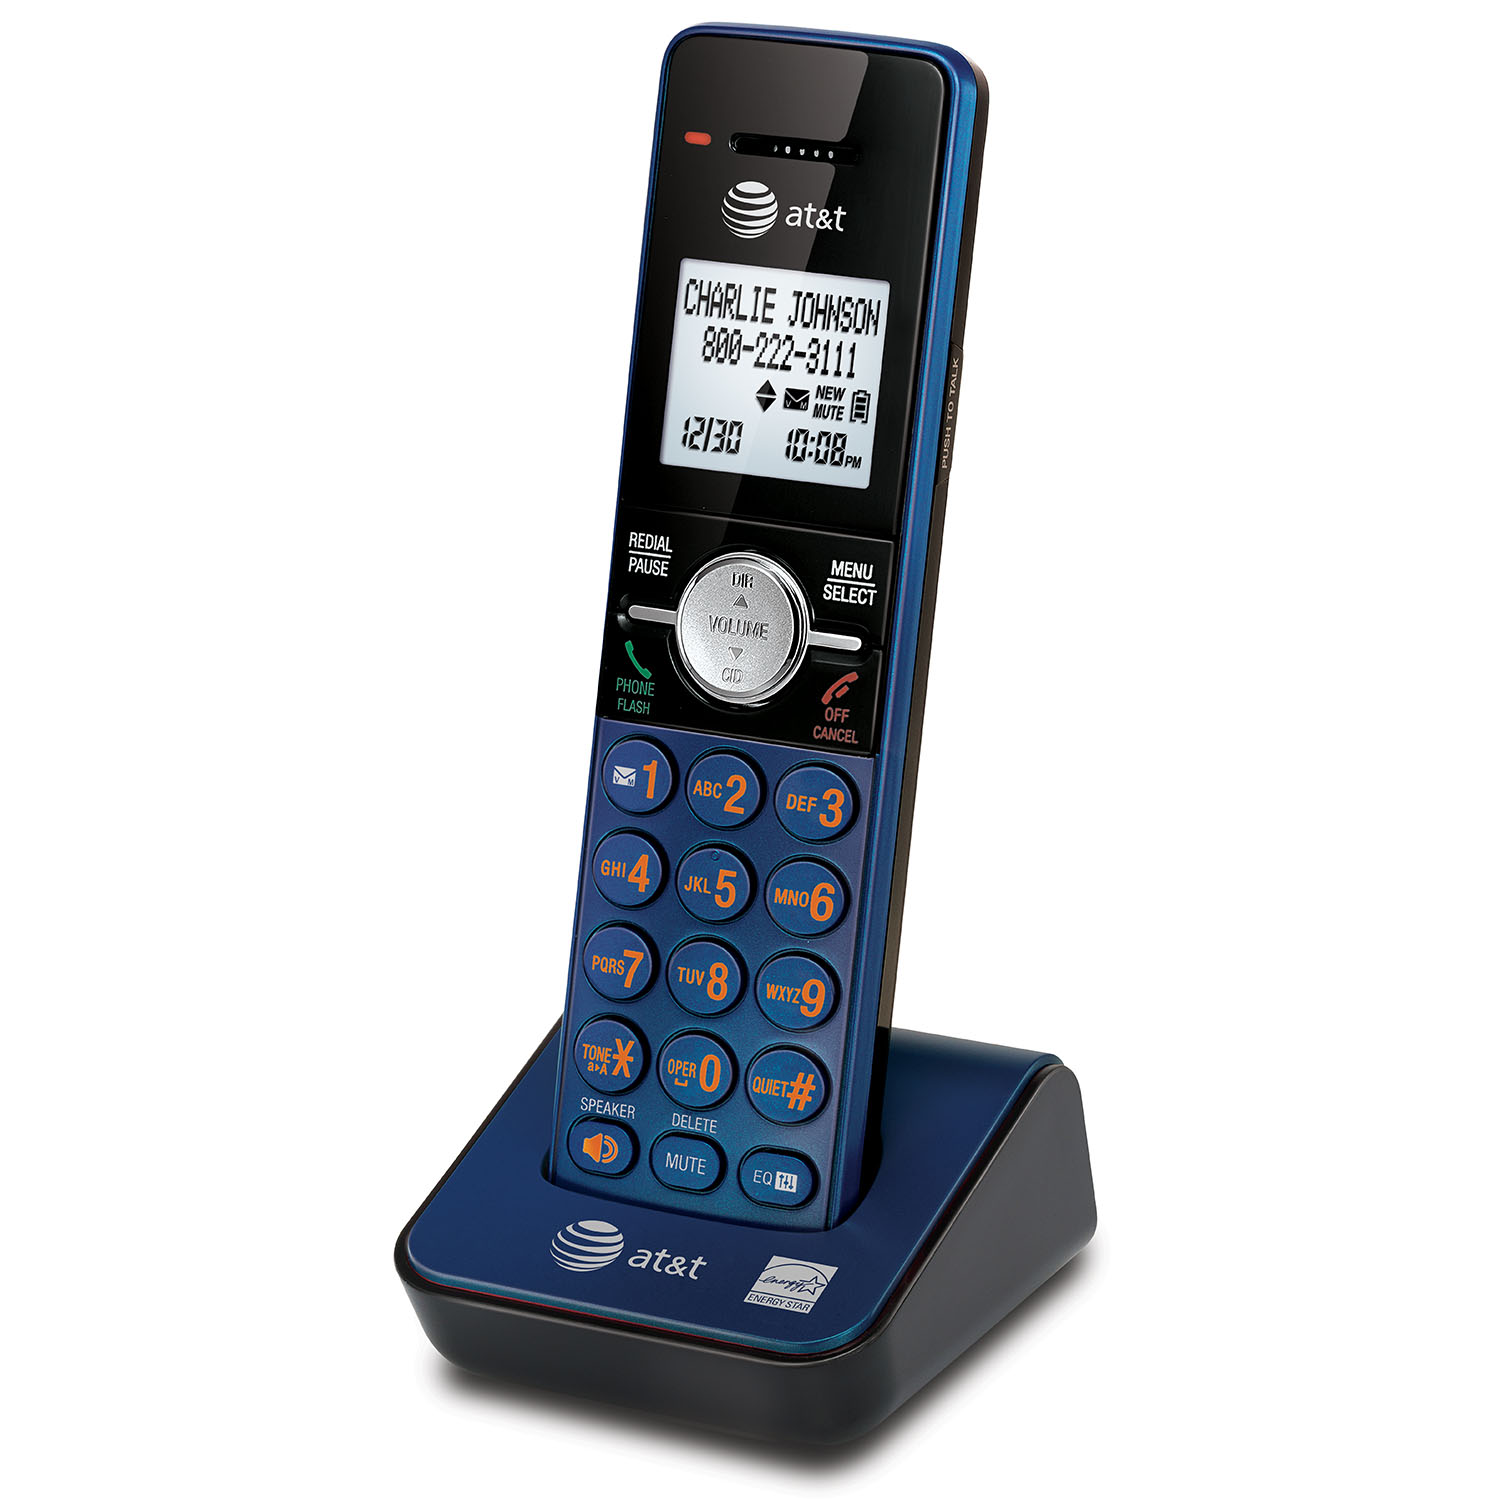 5 handset cordless answering system with caller ID/call waiting - view 4